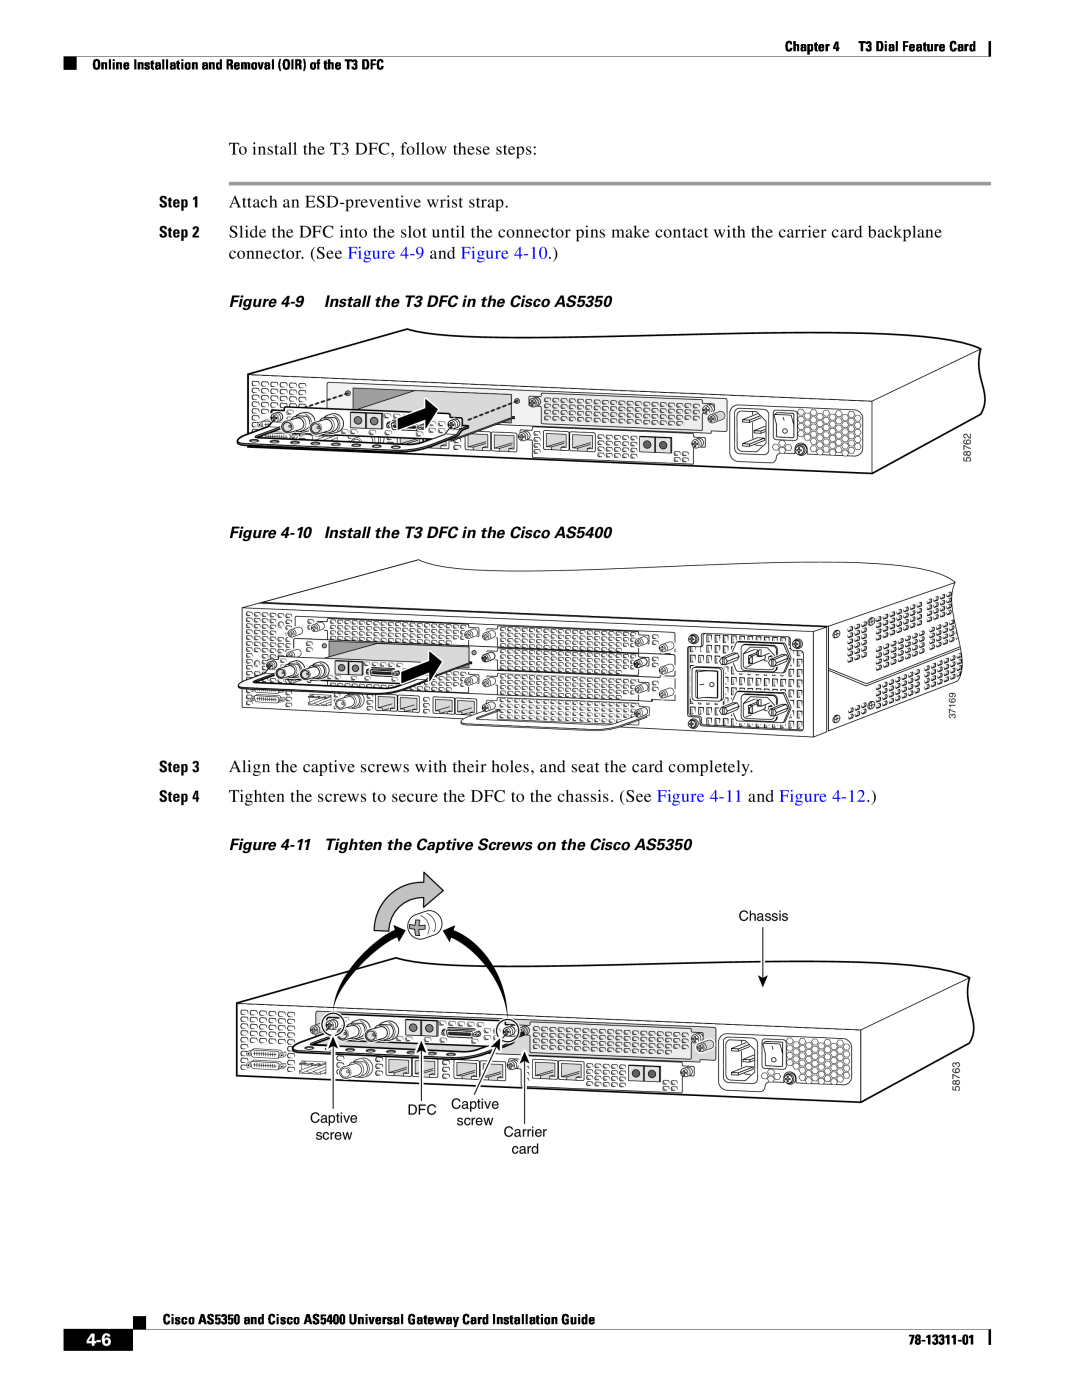 Cisco Systems manual 9 Install the T3 DFC in the Cisco AS5350, 10 Install the T3 DFC in the Cisco AS5400 